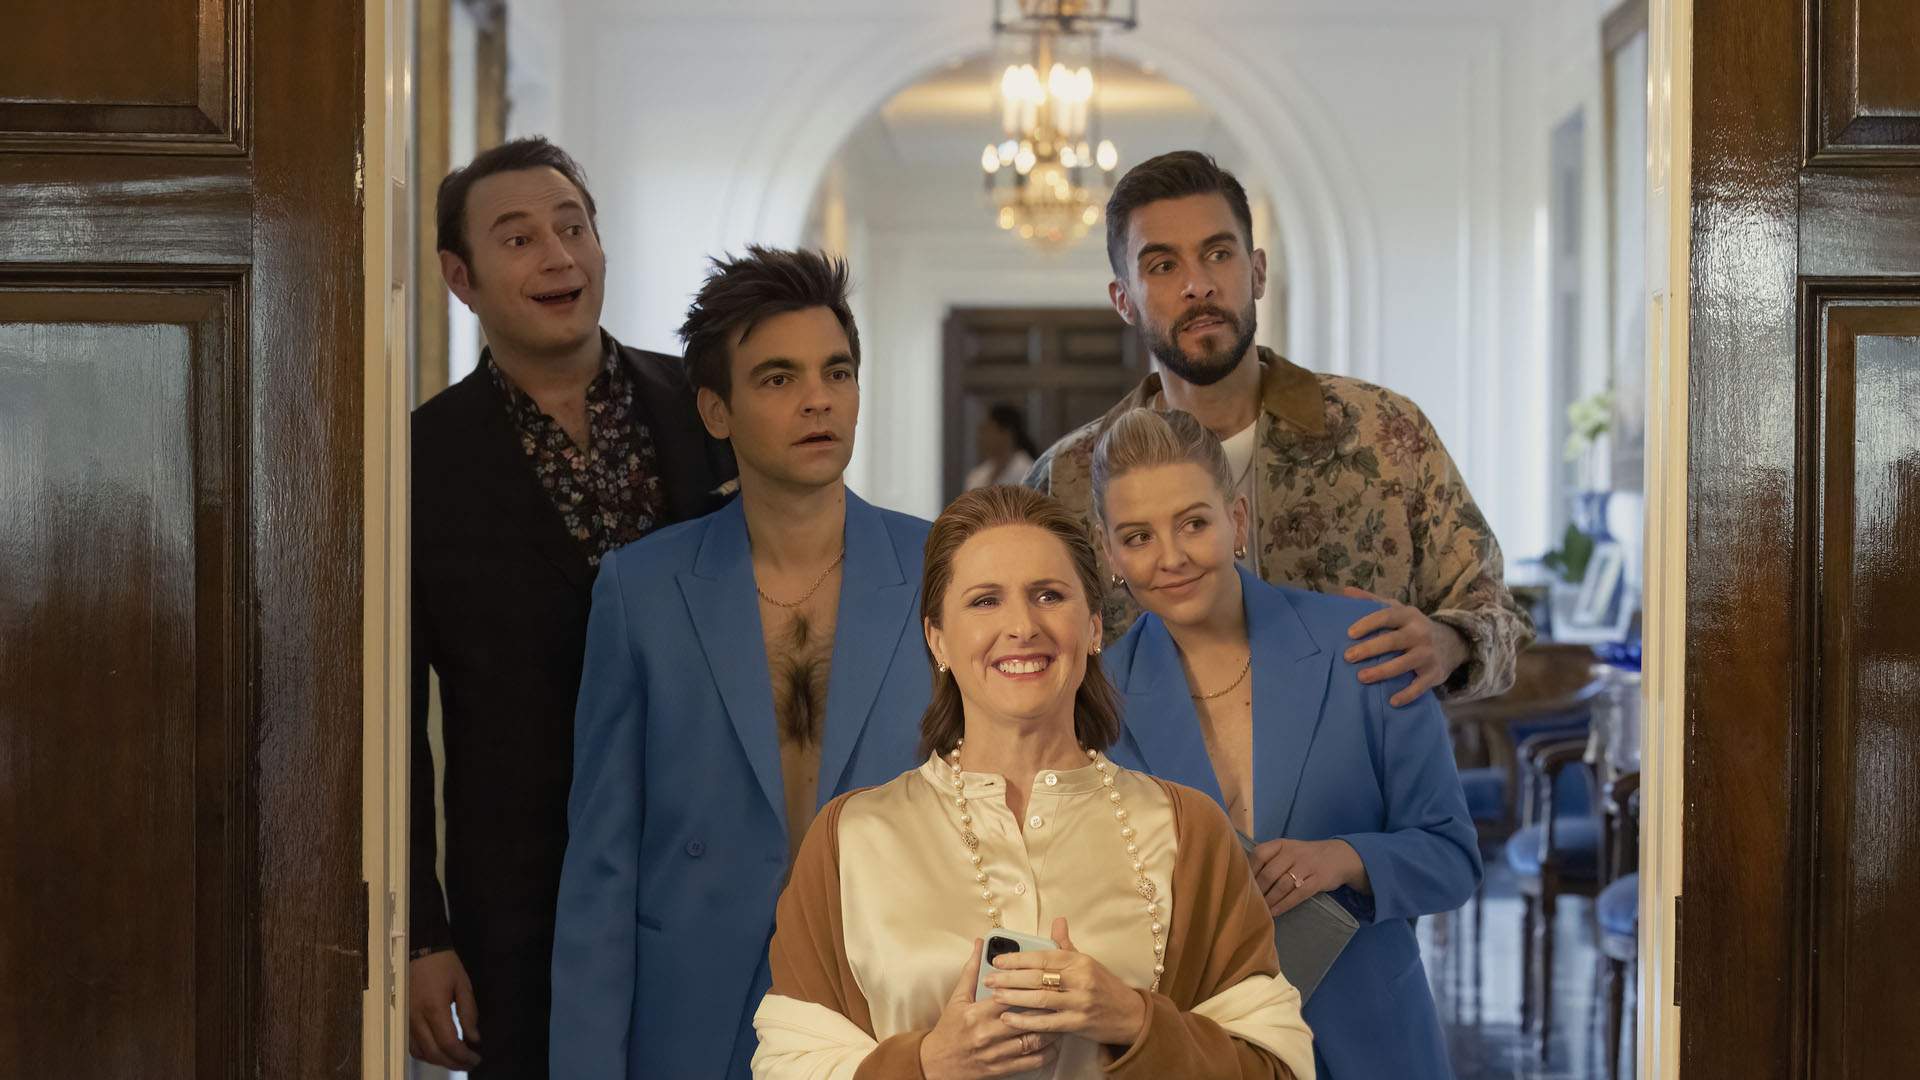 Showbiz Satire 'The Other Two' Is Still the Funniest Comedy on TV in Its Stellar Third Season